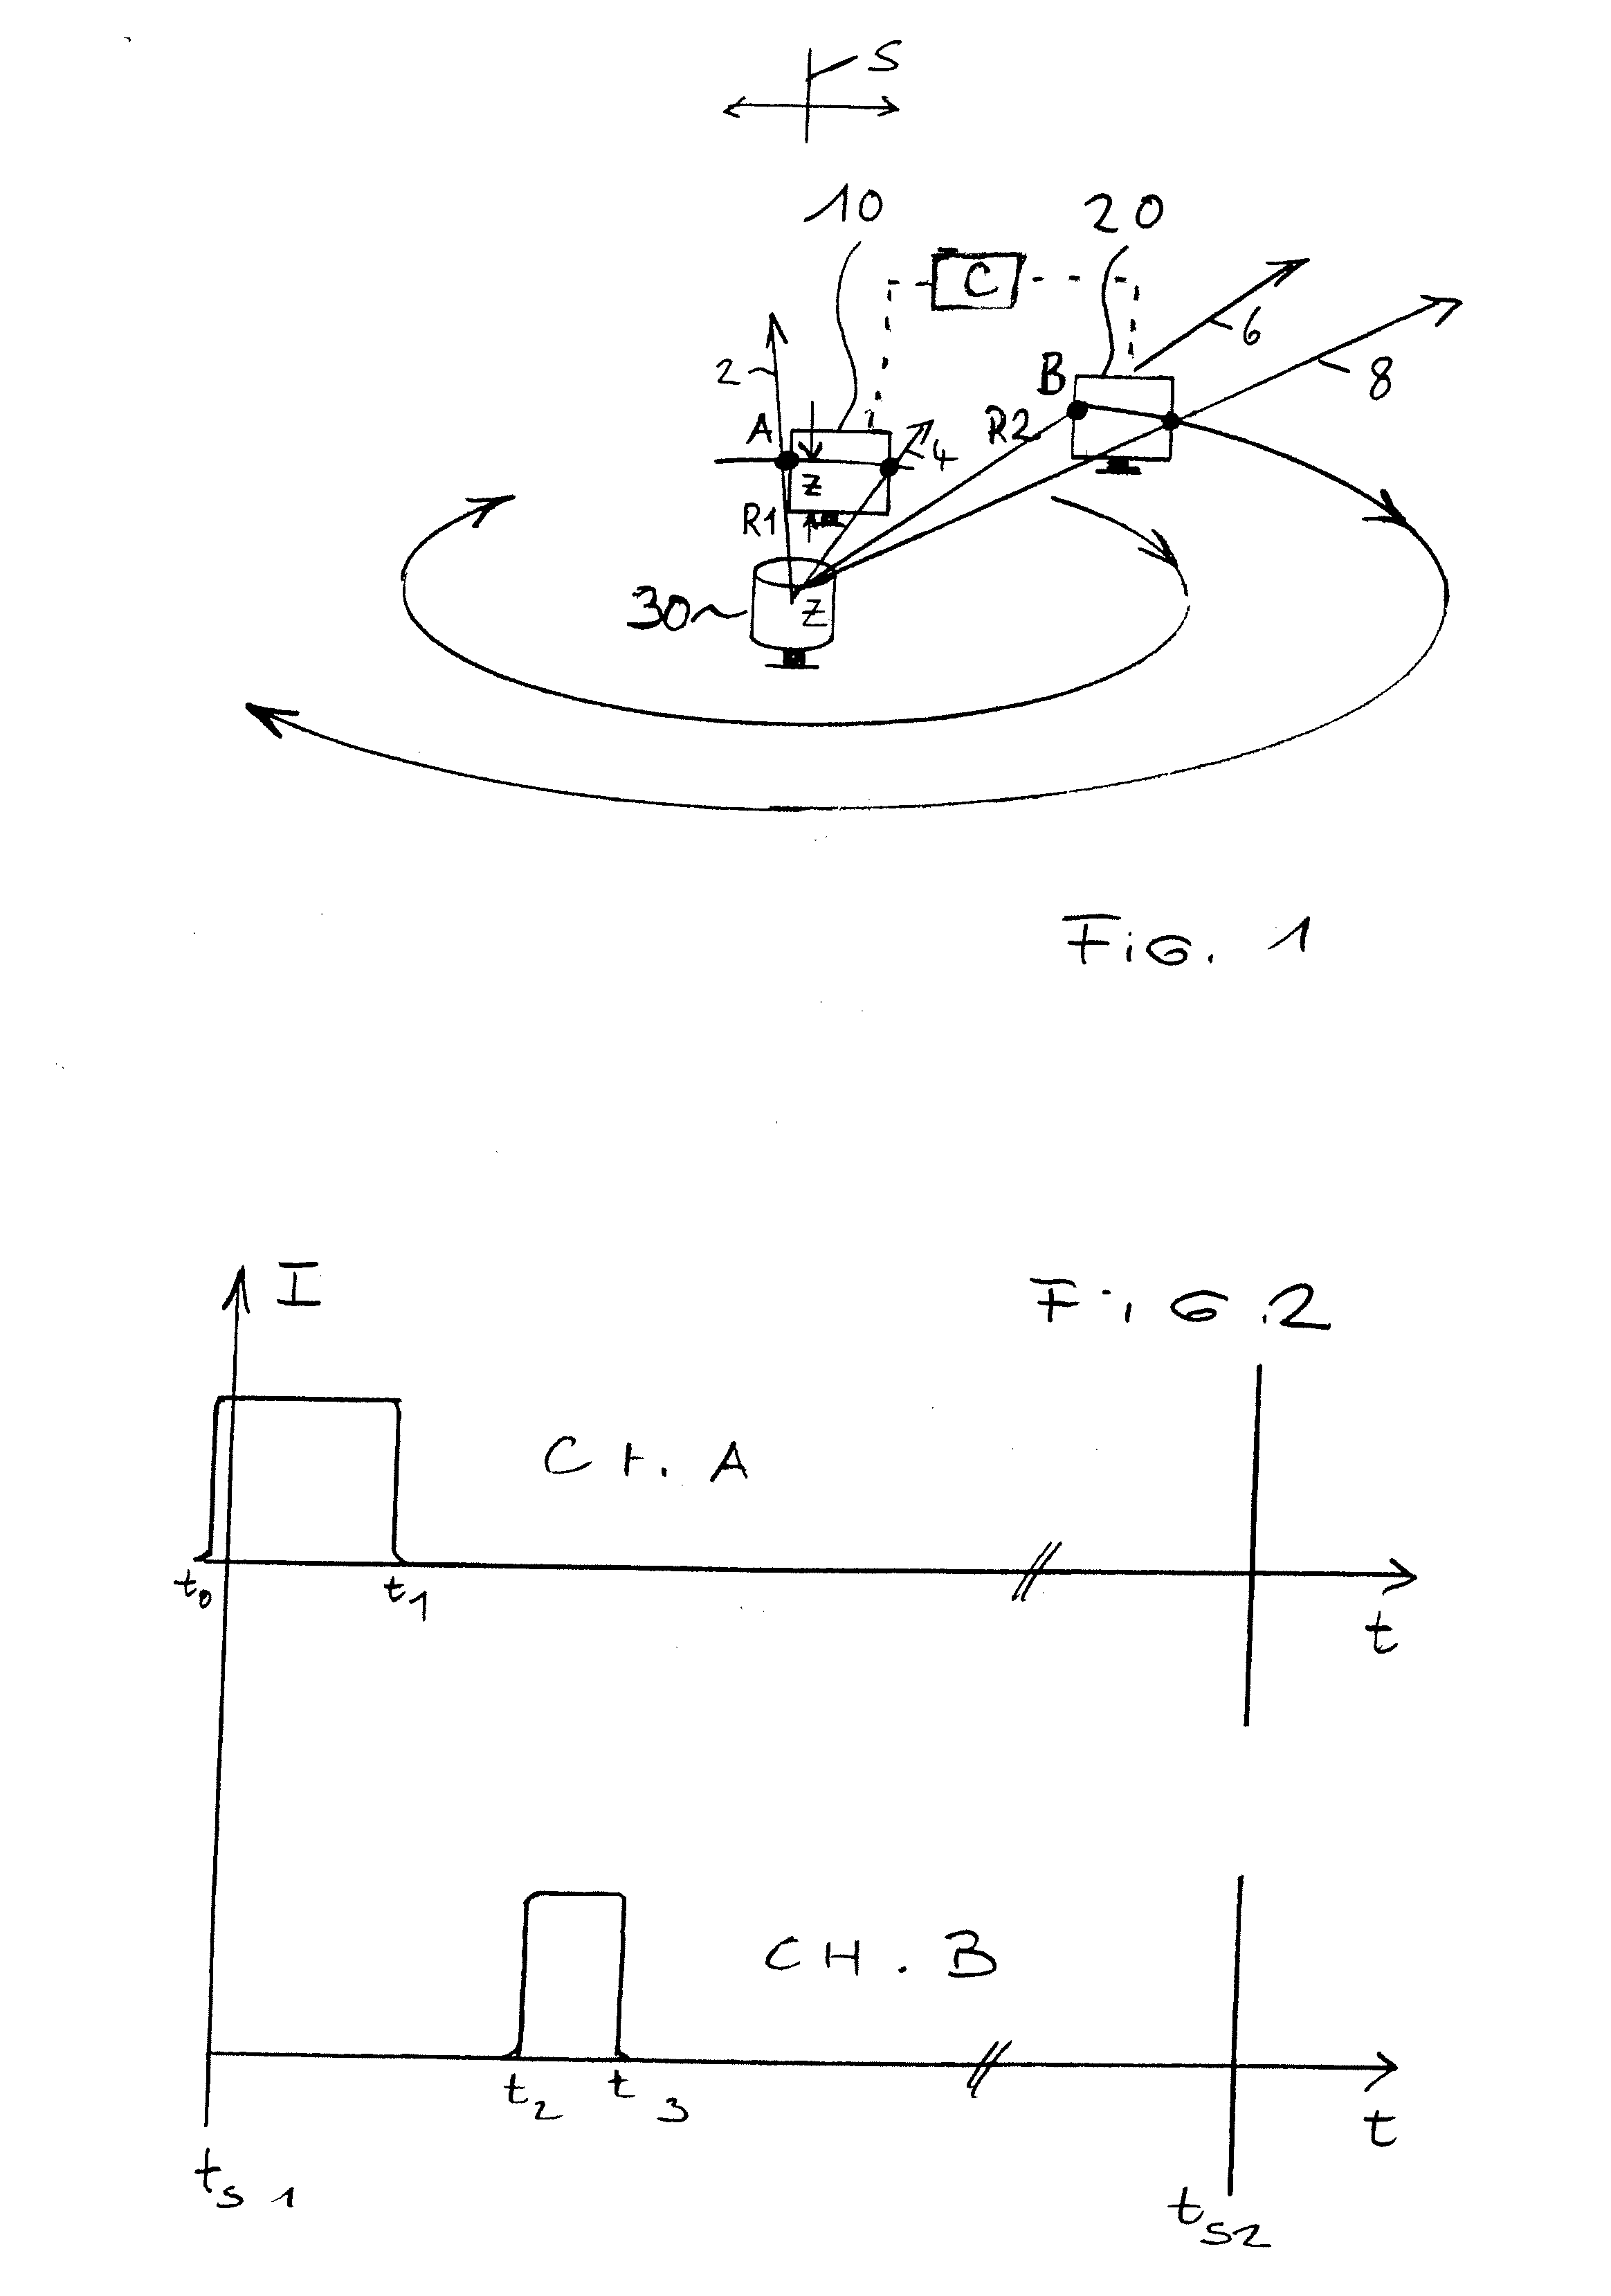 Method of determining the flatness of a foundation to which a building structure, machinery or equipment is to be mounted